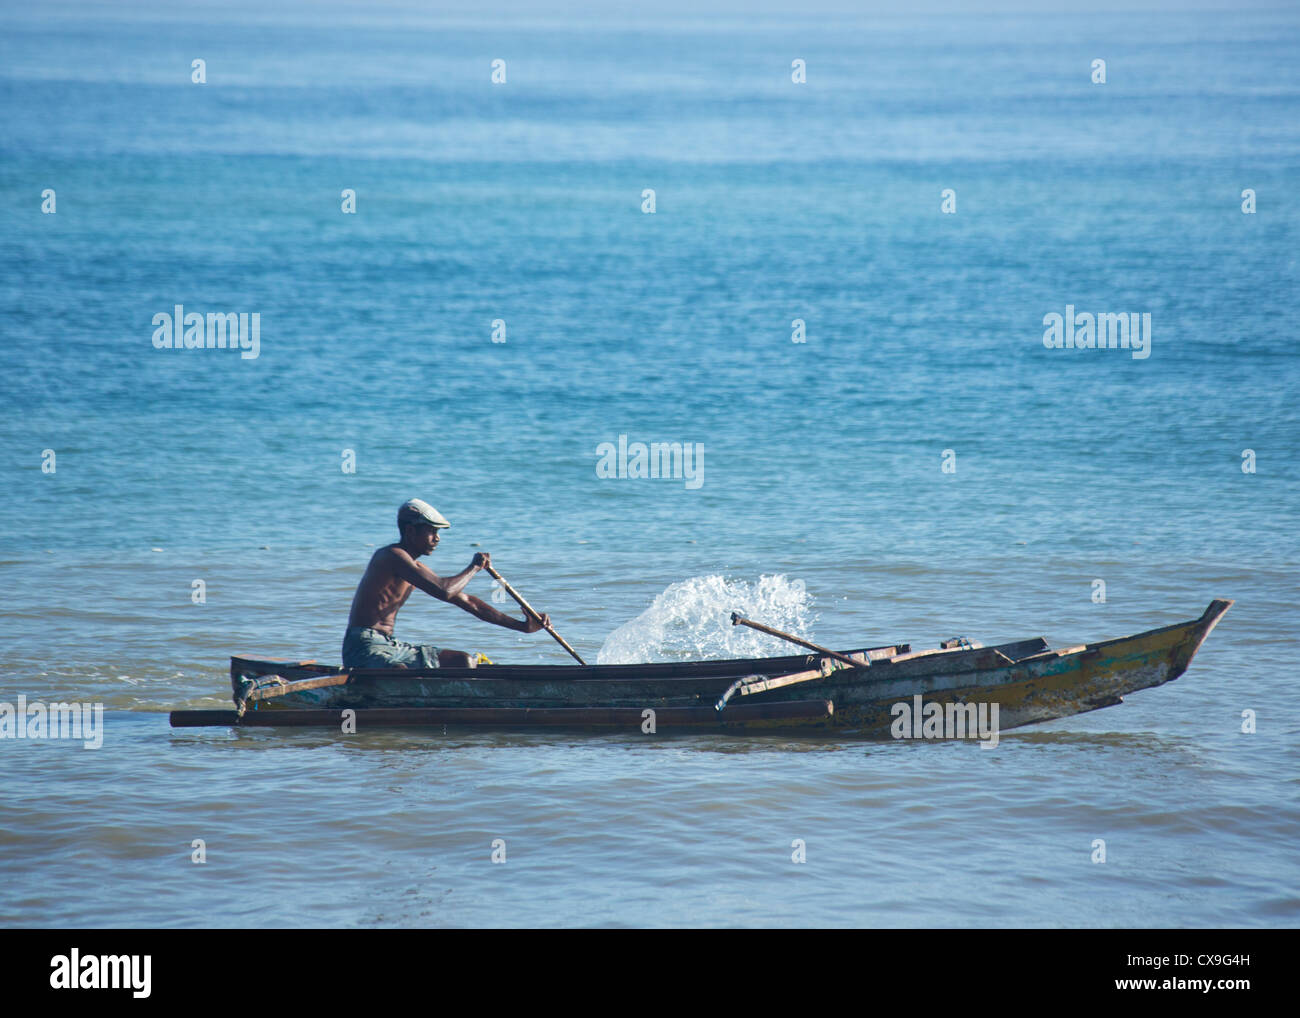 Man fishing in a boat, Dili, East Timor Stock Photo